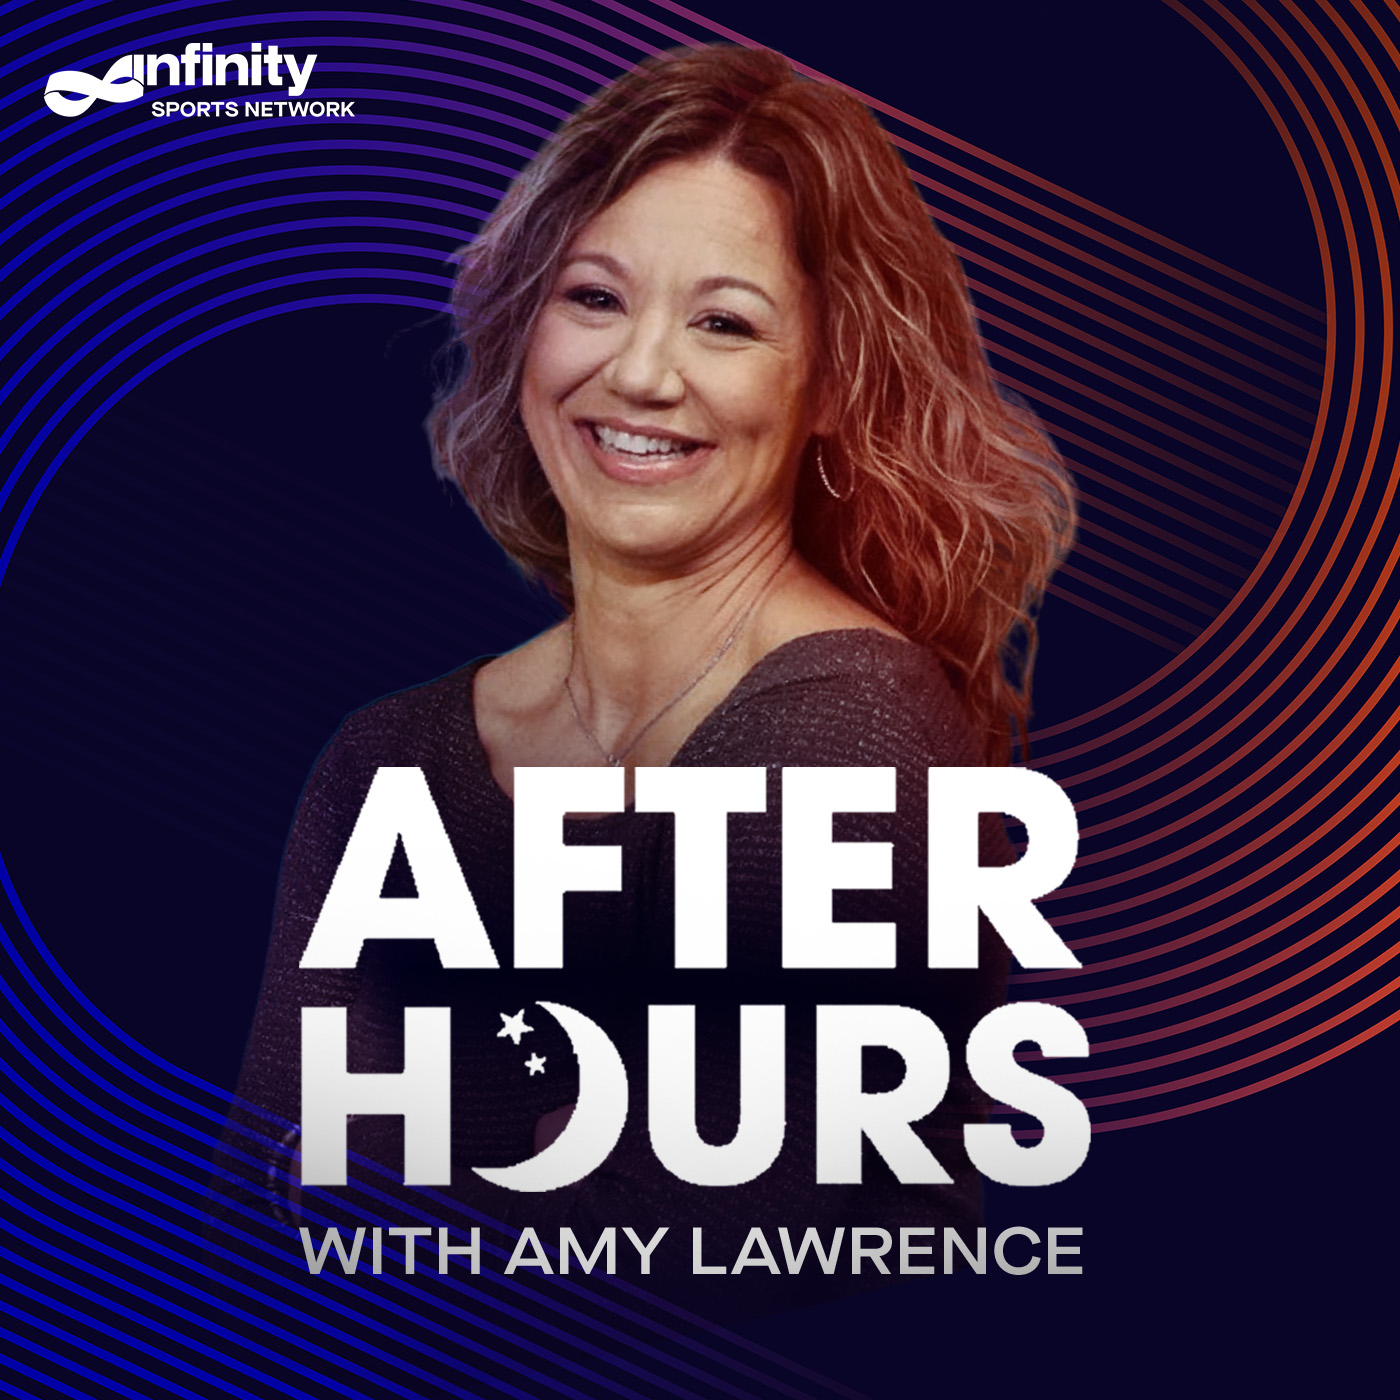 5/27/21 After Hours with Amy Lawrence PODCAST: Hour 4